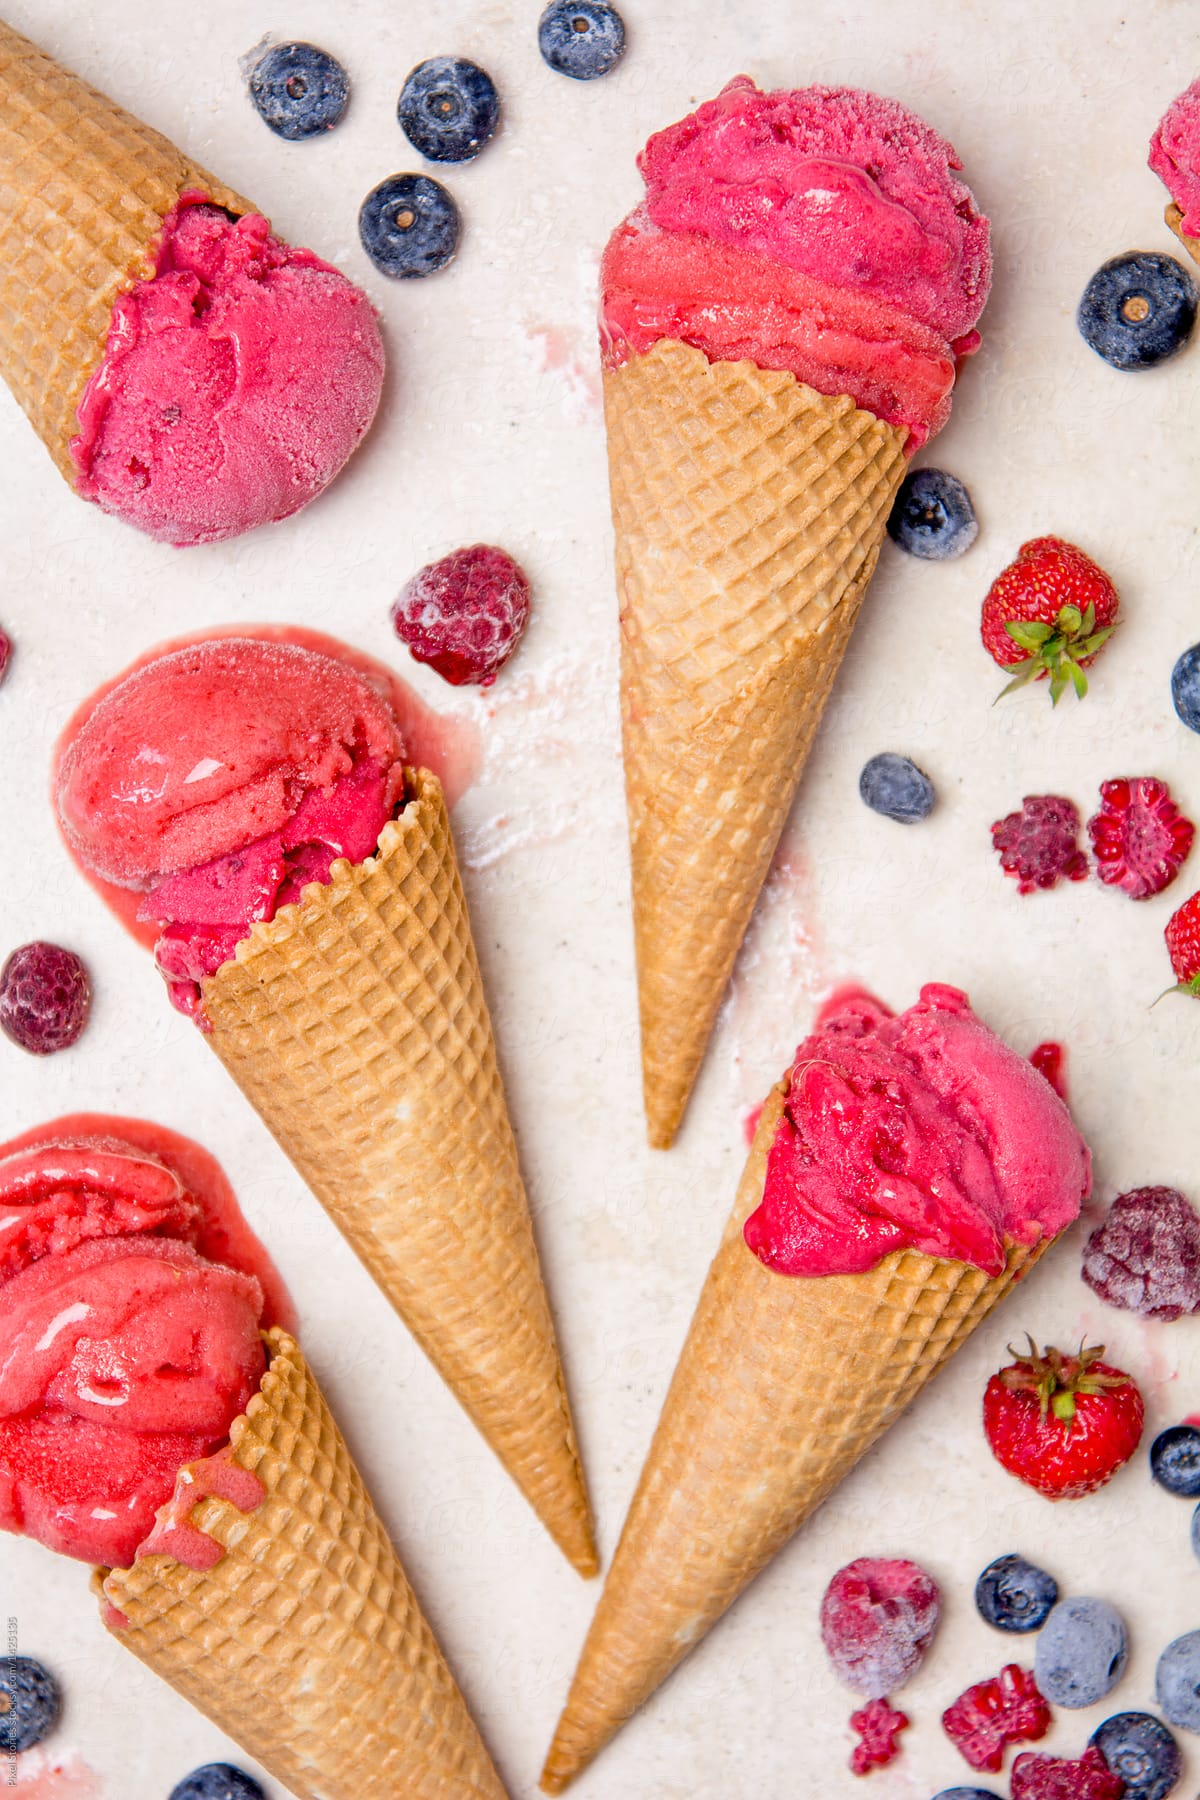 Healthy homemade forest fruits ice cream in cones